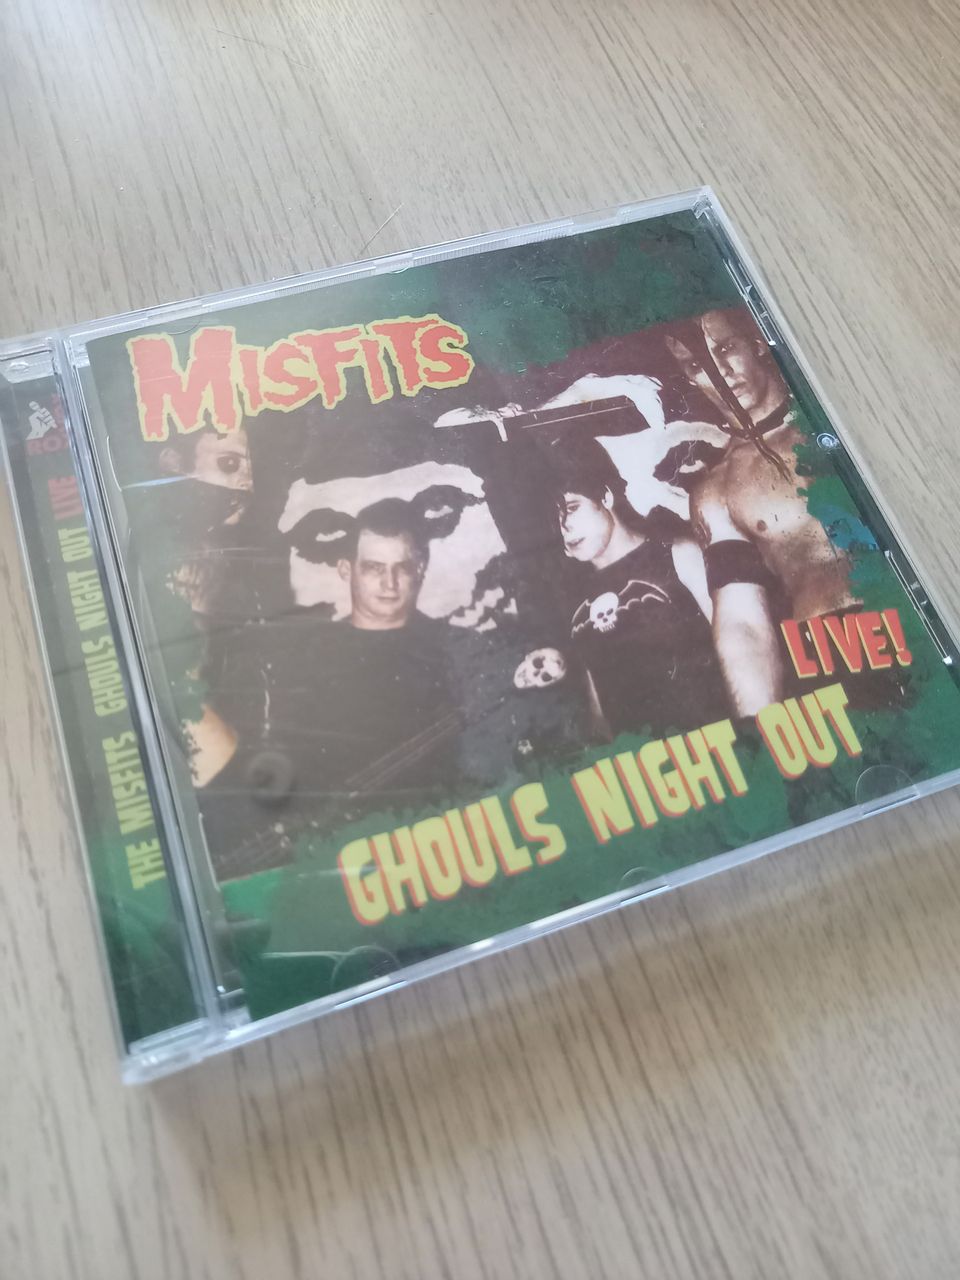 Misfits - Ghouls night out CD